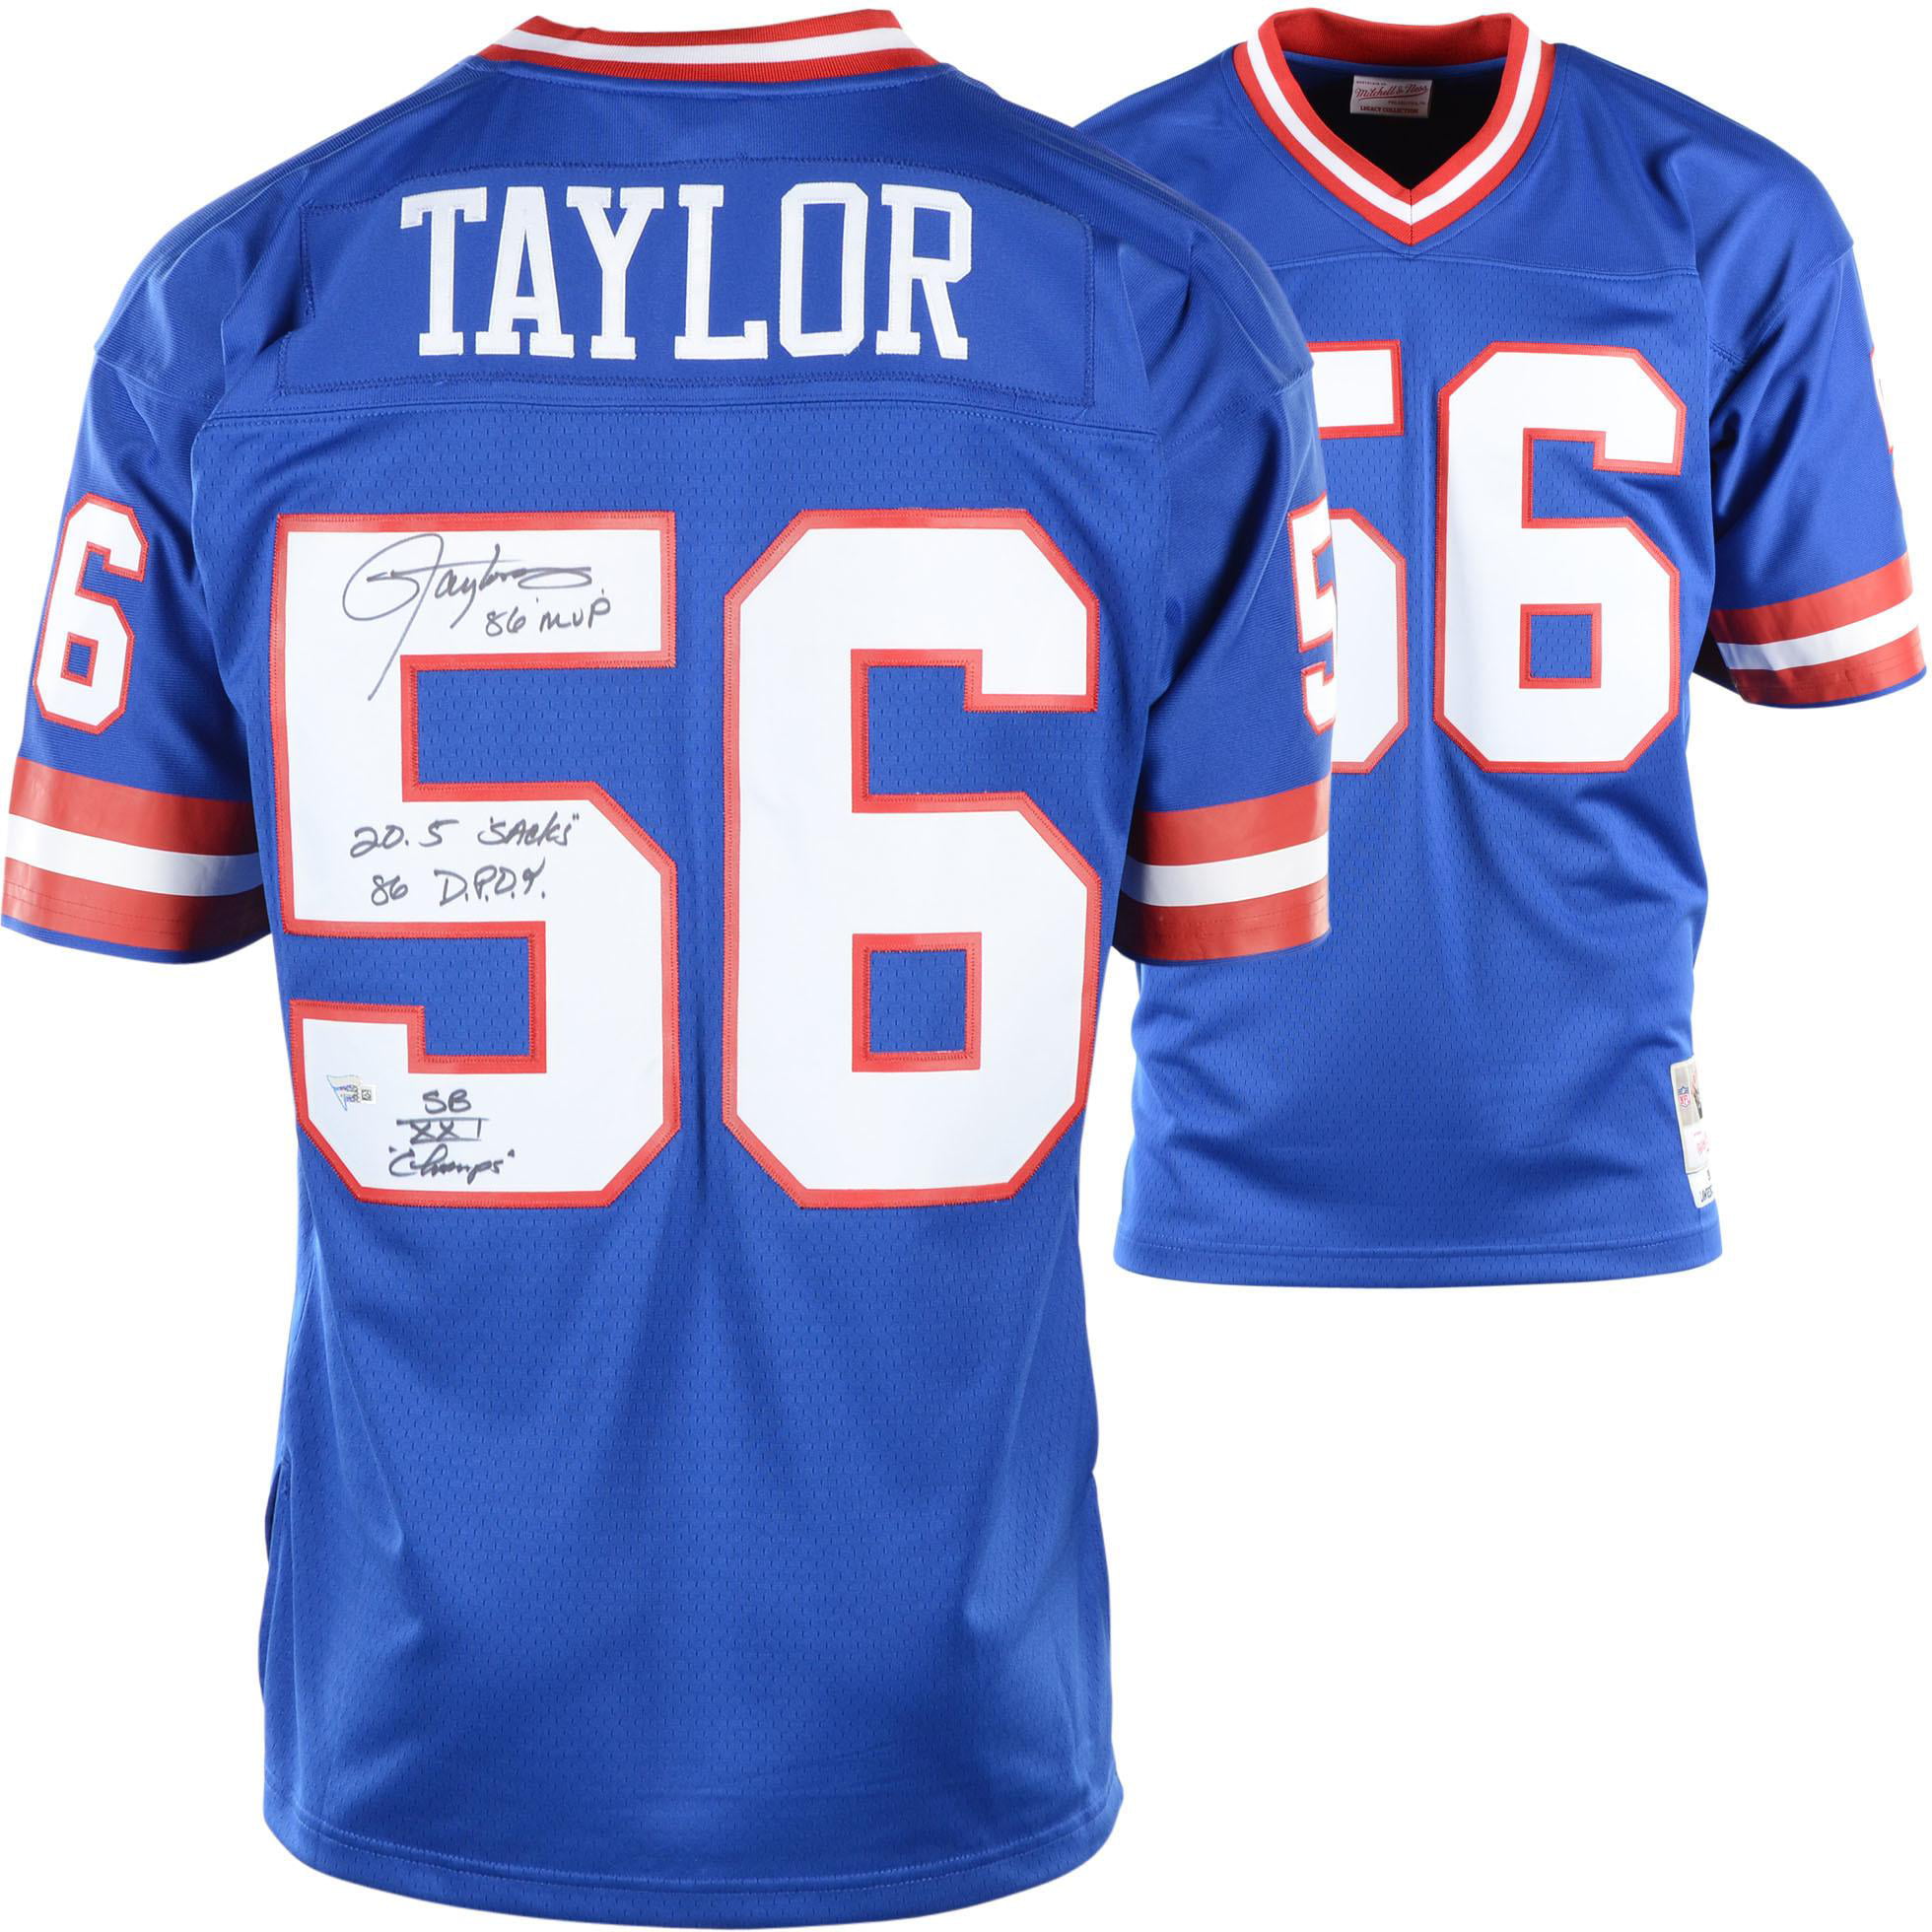 ny giants limited edition jersey